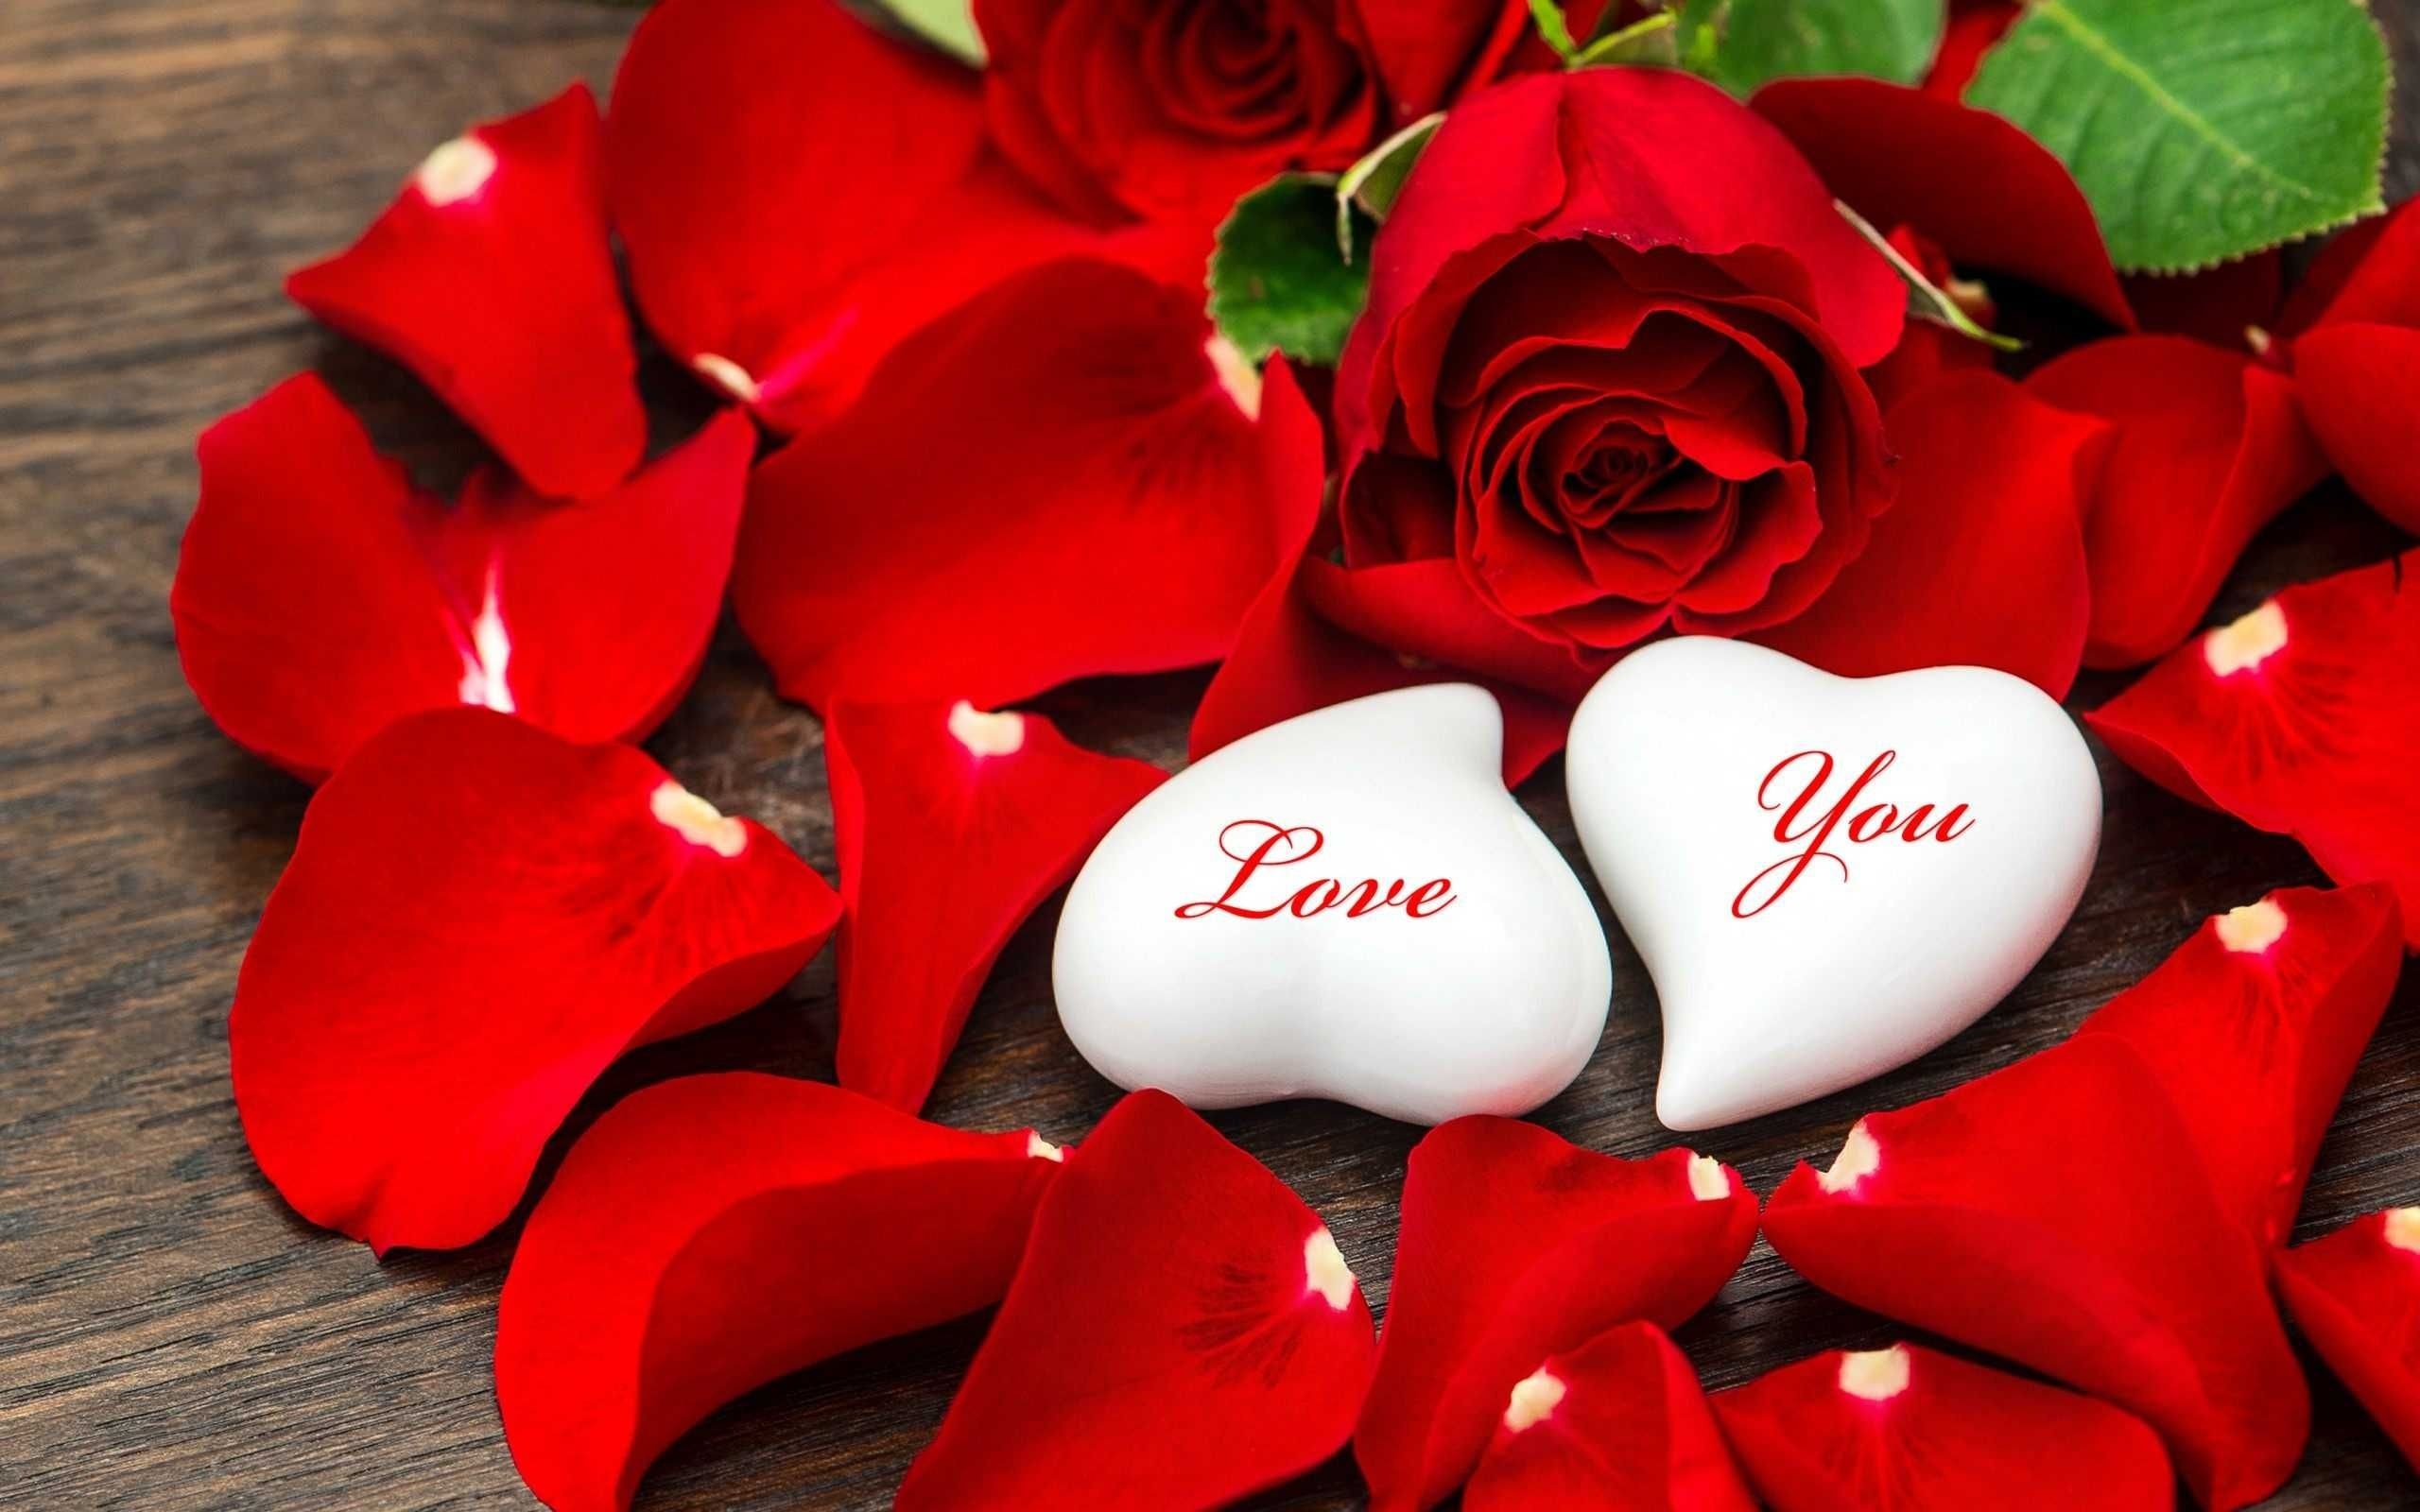 Romantic Love Flowers Wallpapers - Top Free Romantic Love Flowers Backgrounds 2560x1600